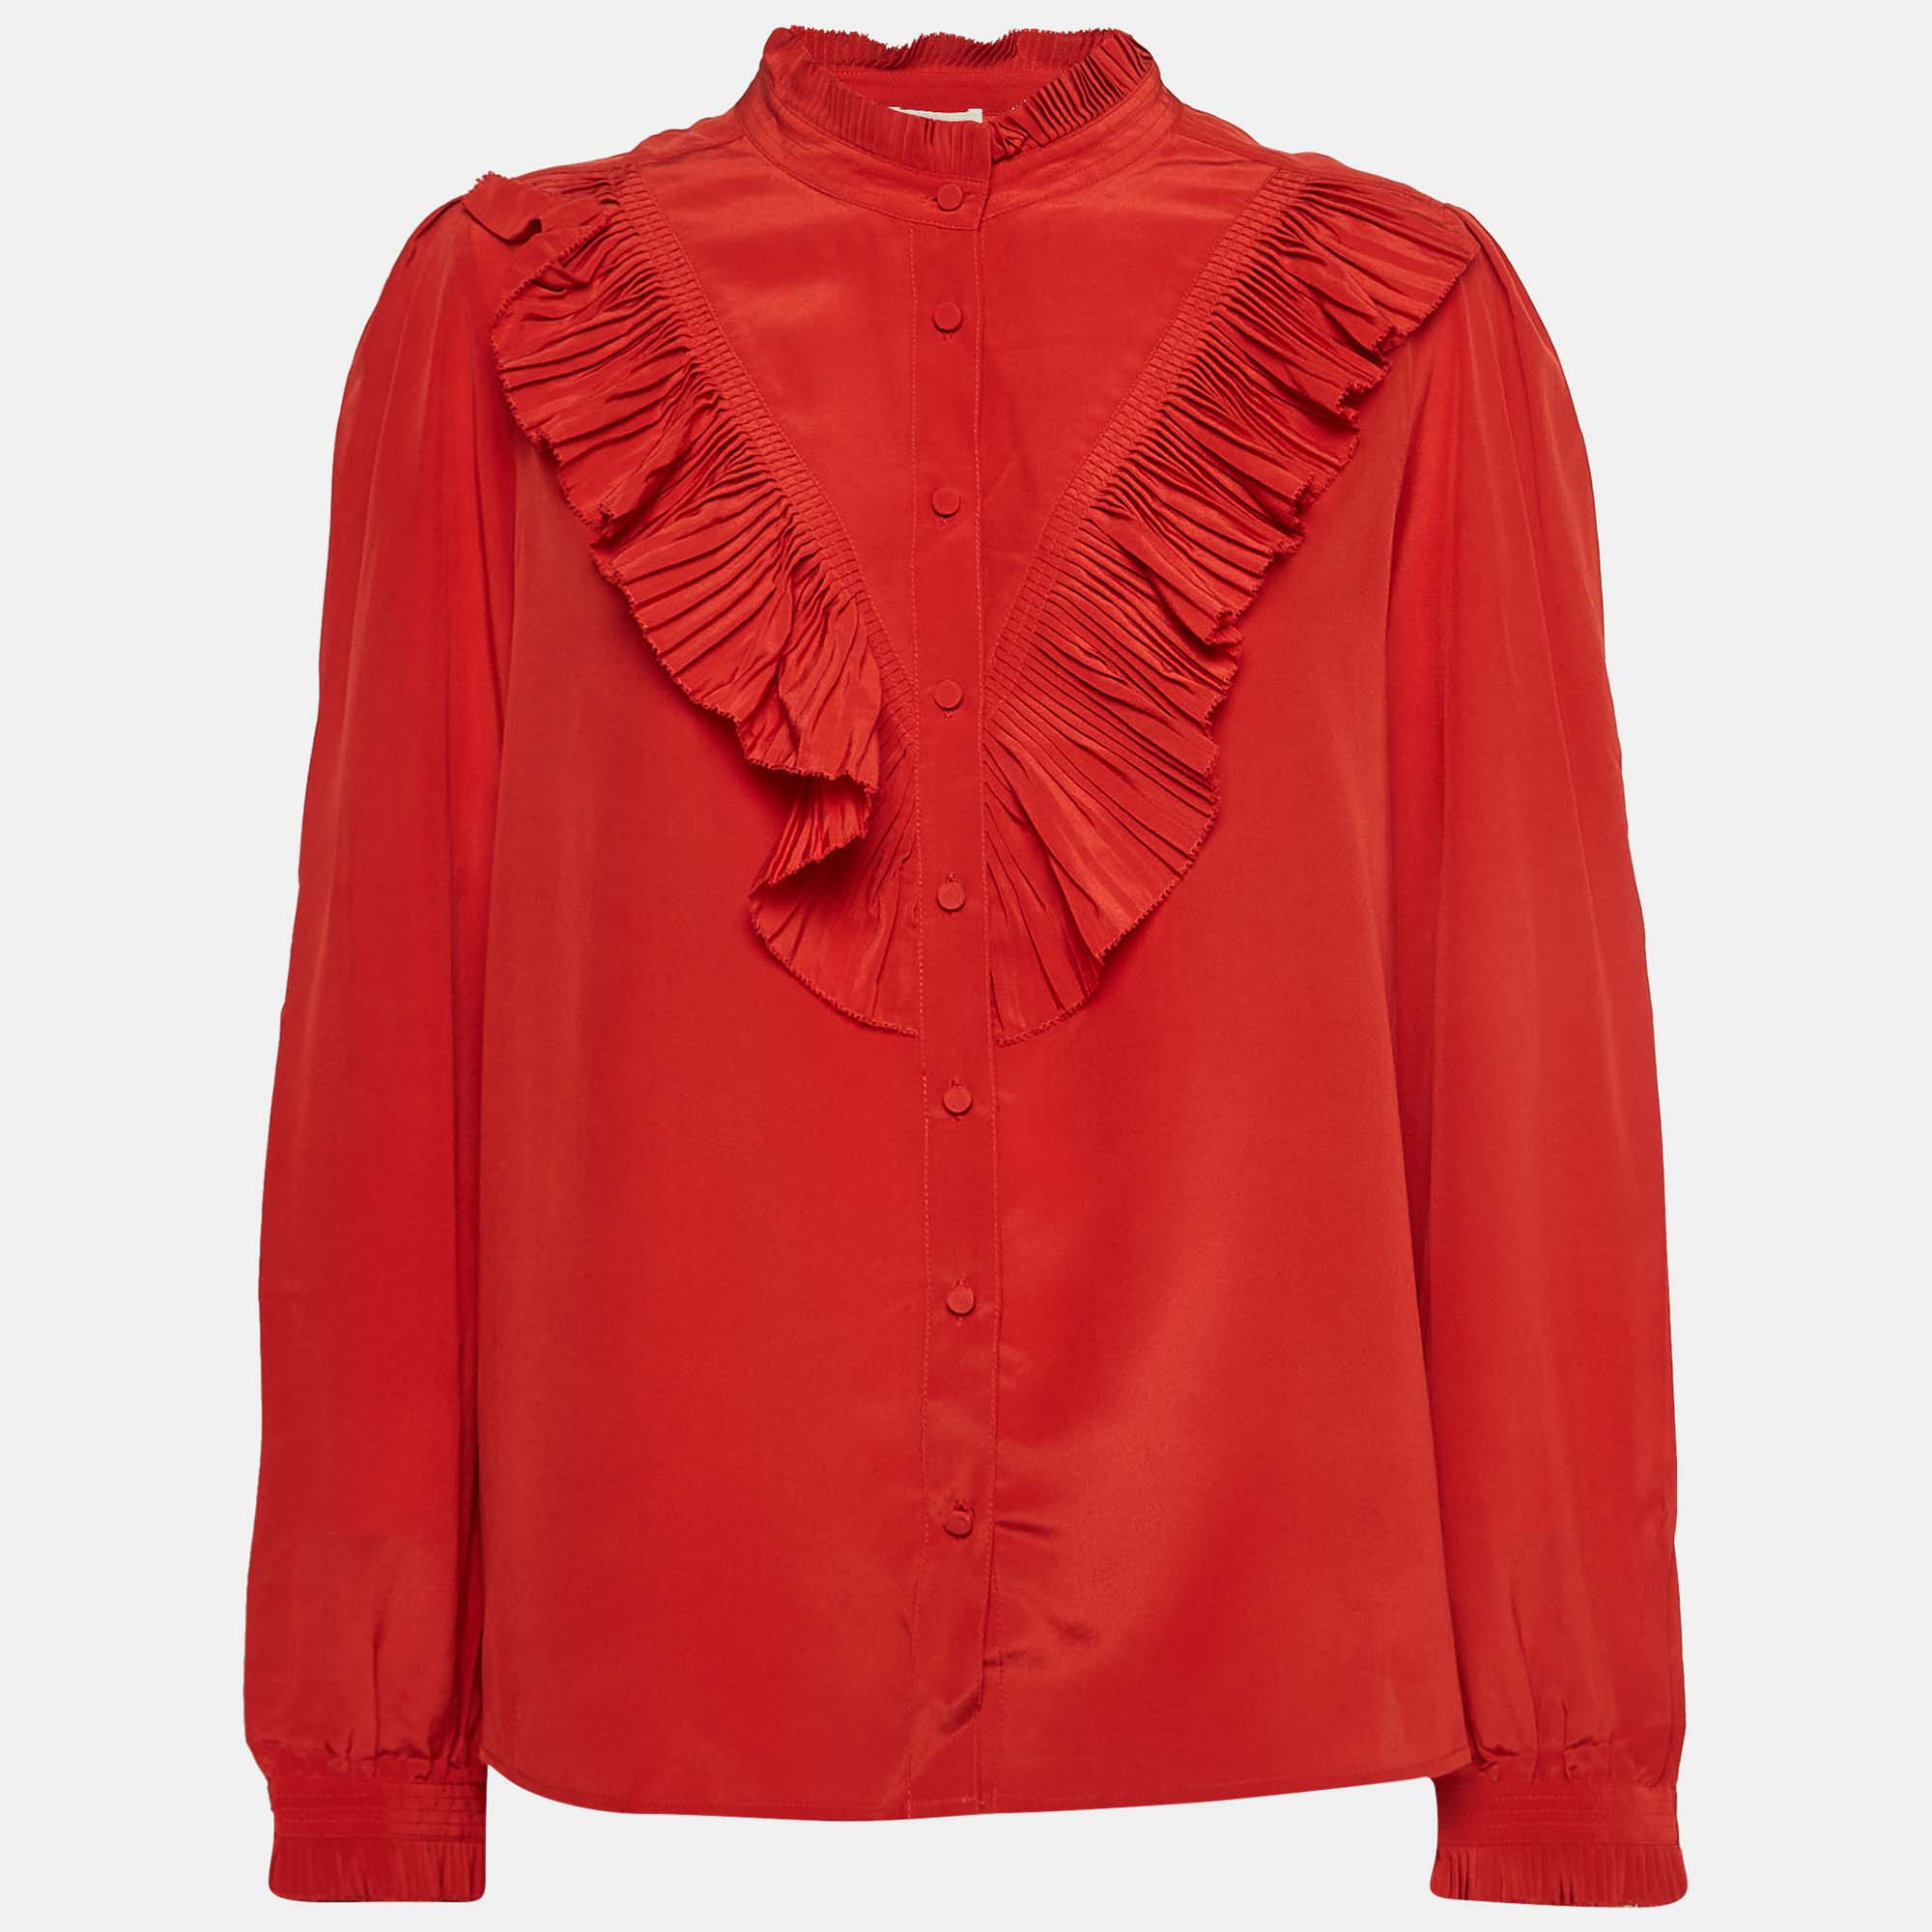 Zadig & voltaire deluxe red silk ruffle detail taccora shirt m